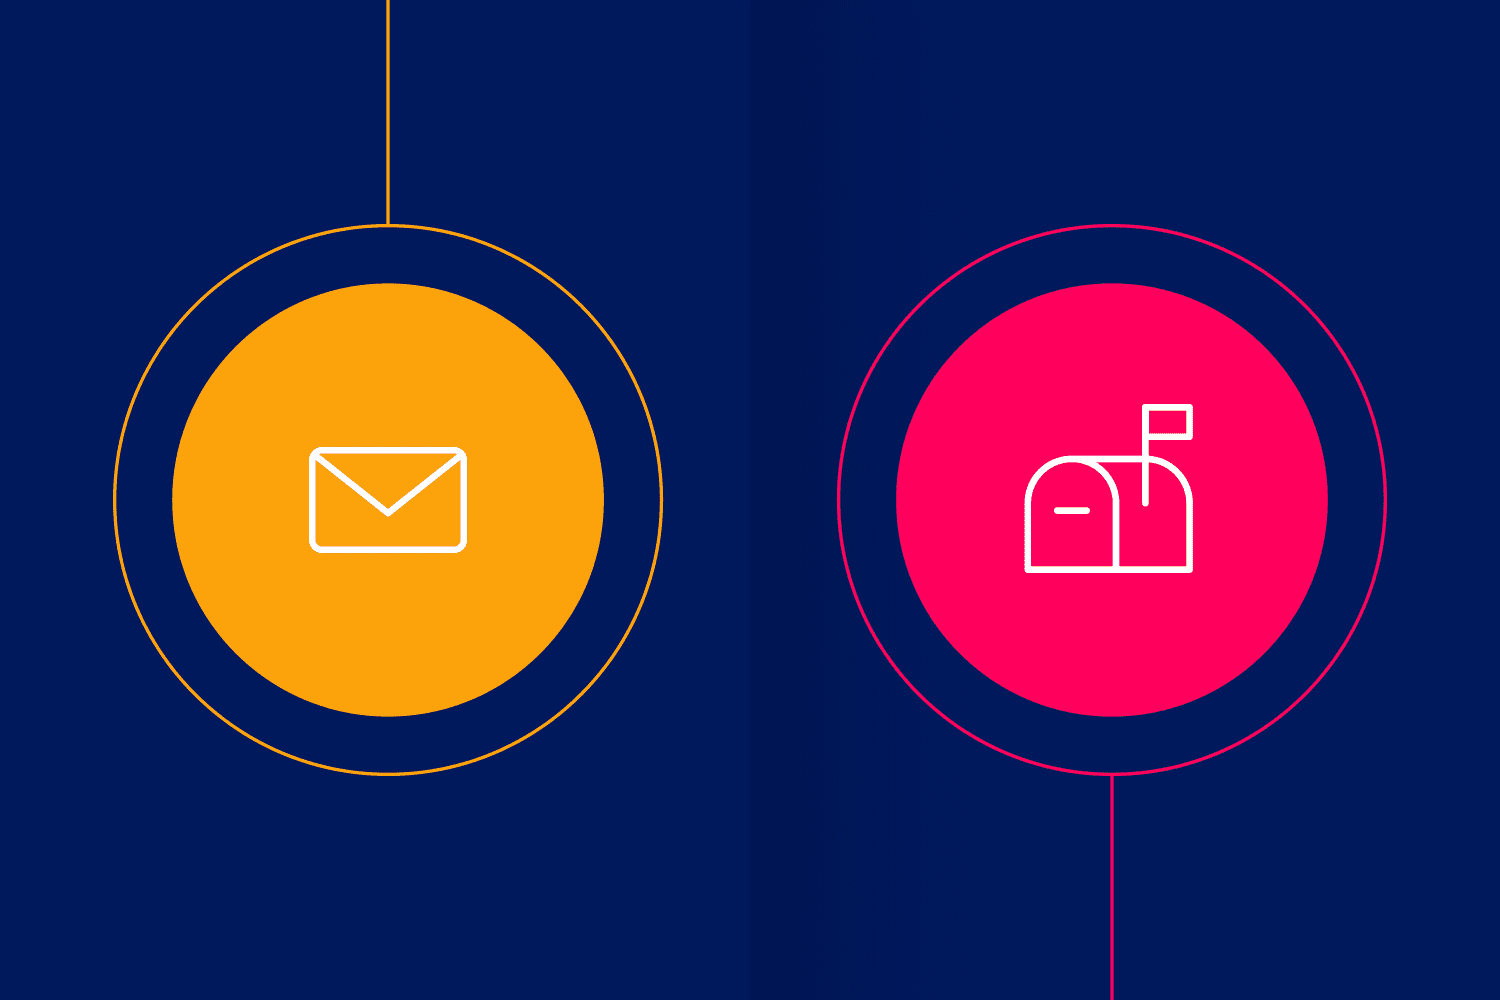 Email and mailbox icons to depict direct mail automation